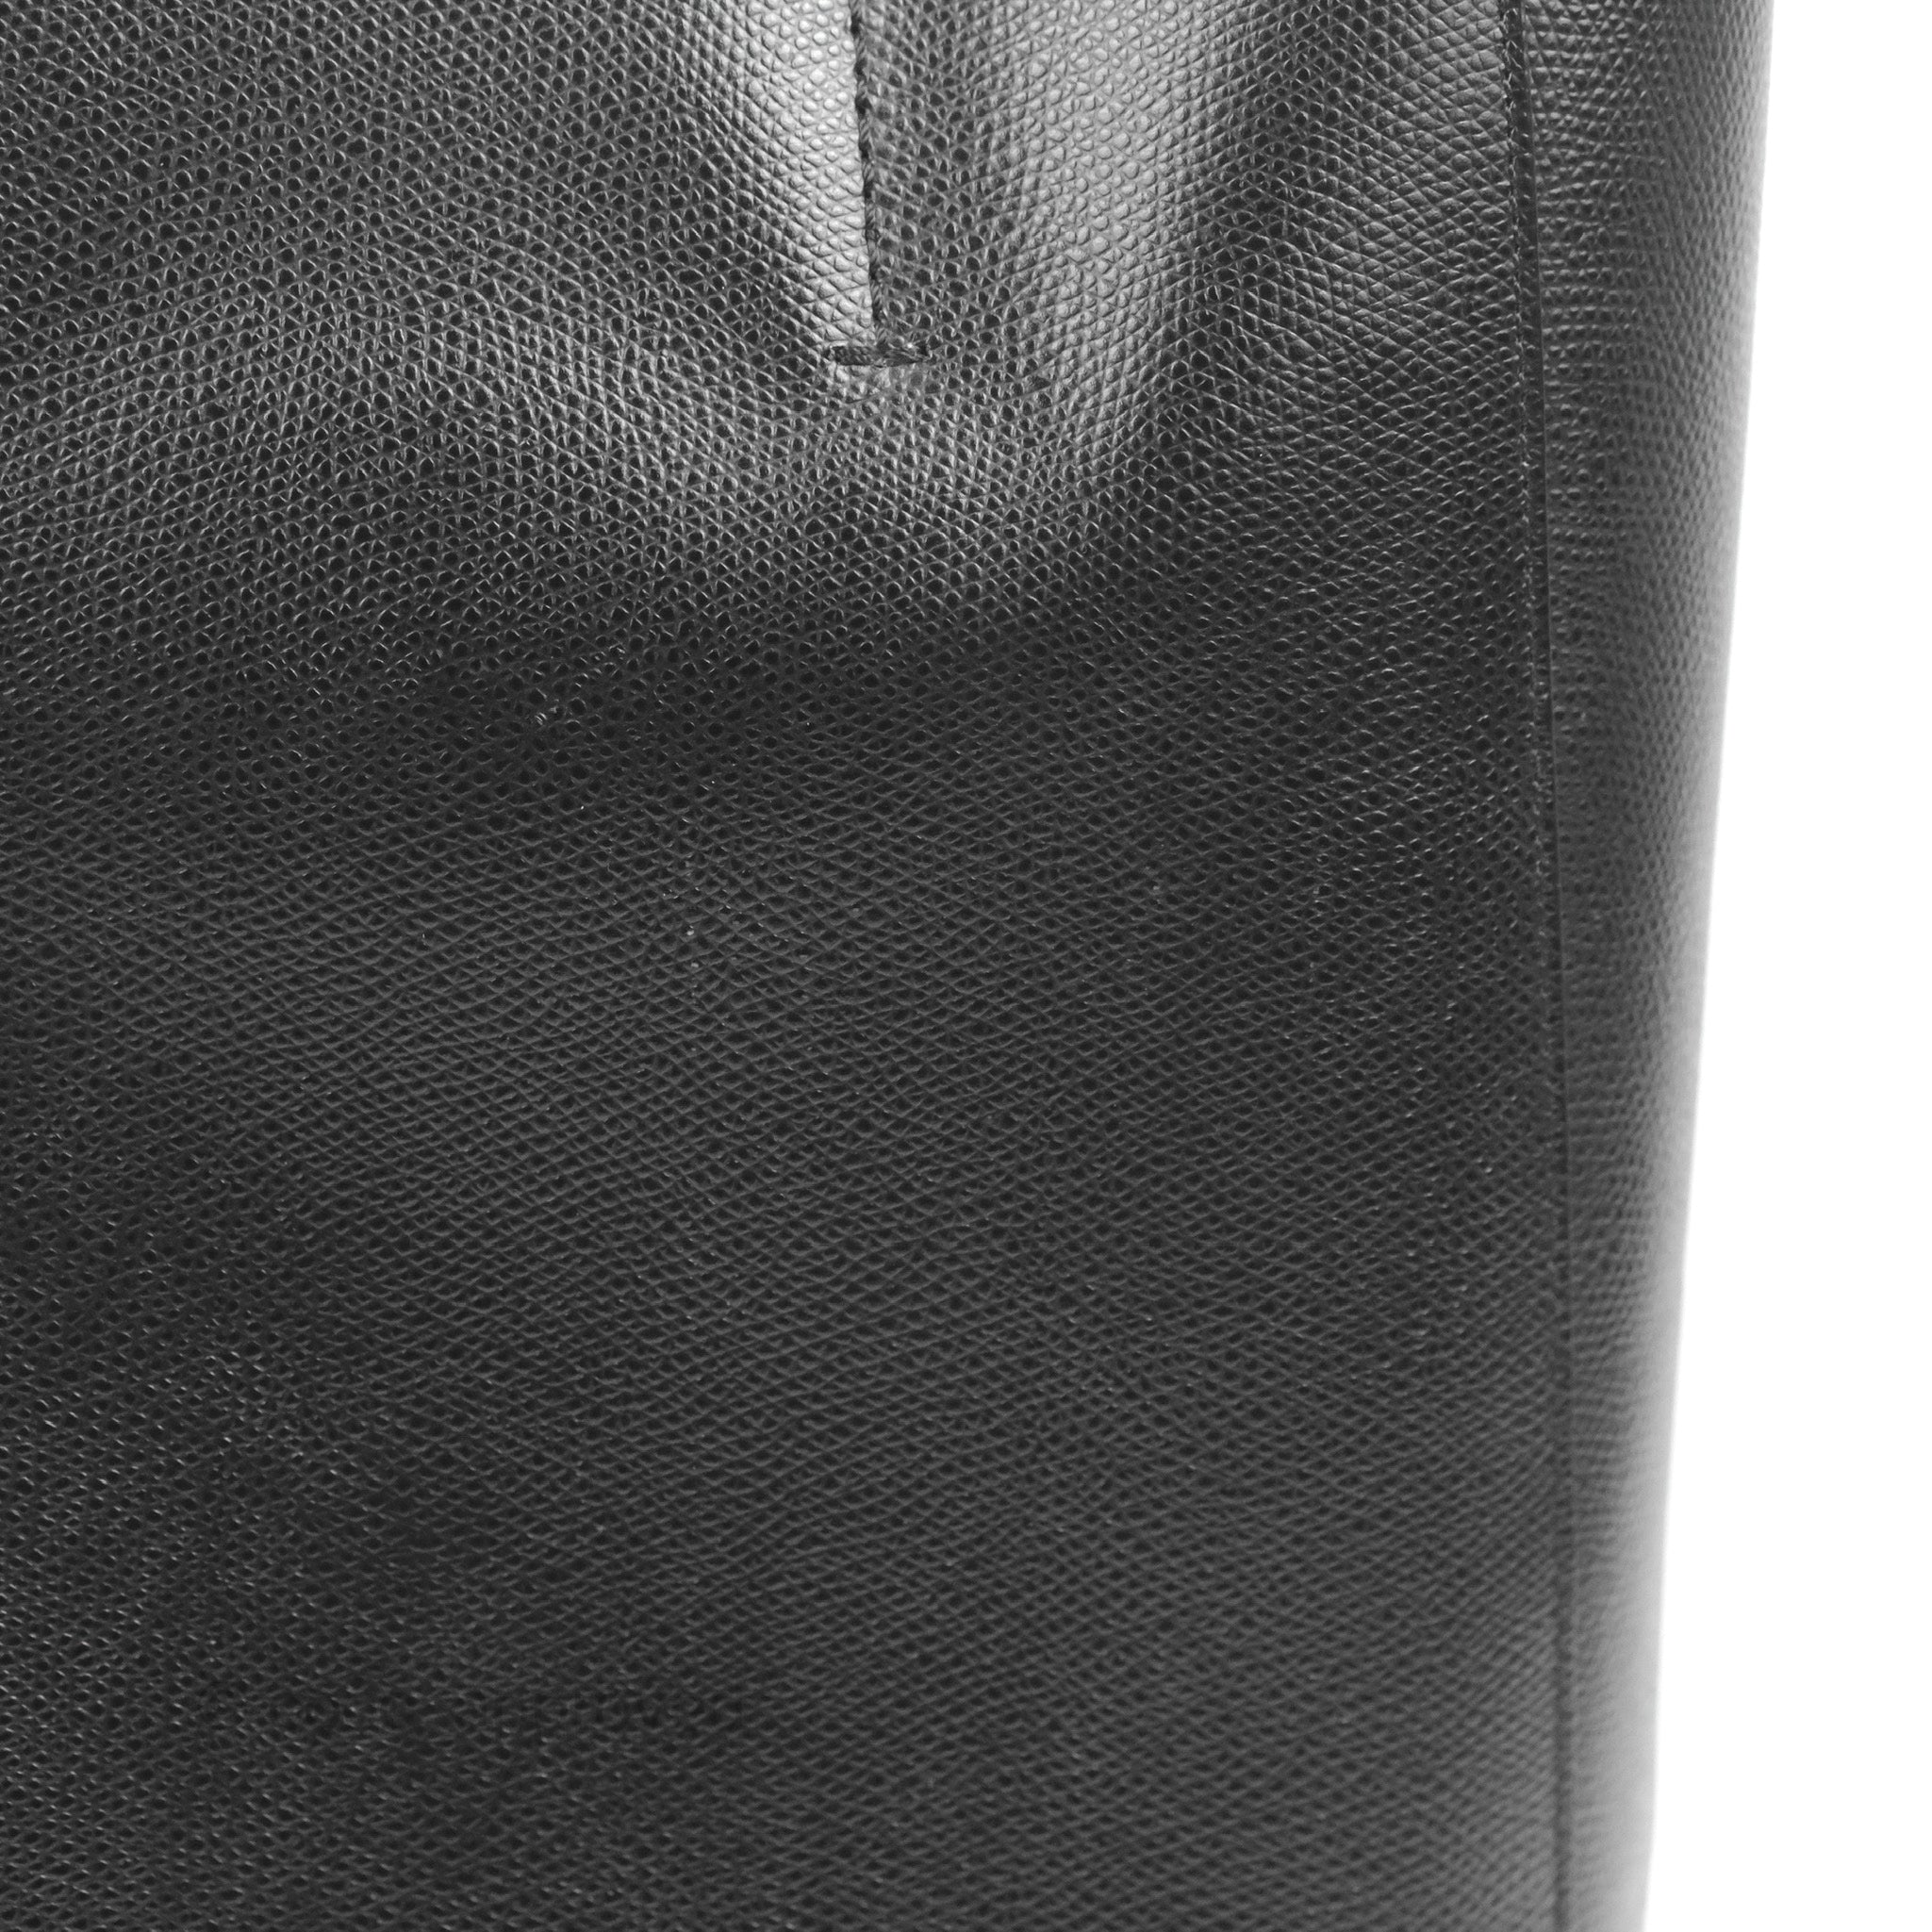 Cabas vertical leather tote Celine Black in Leather - 31515460